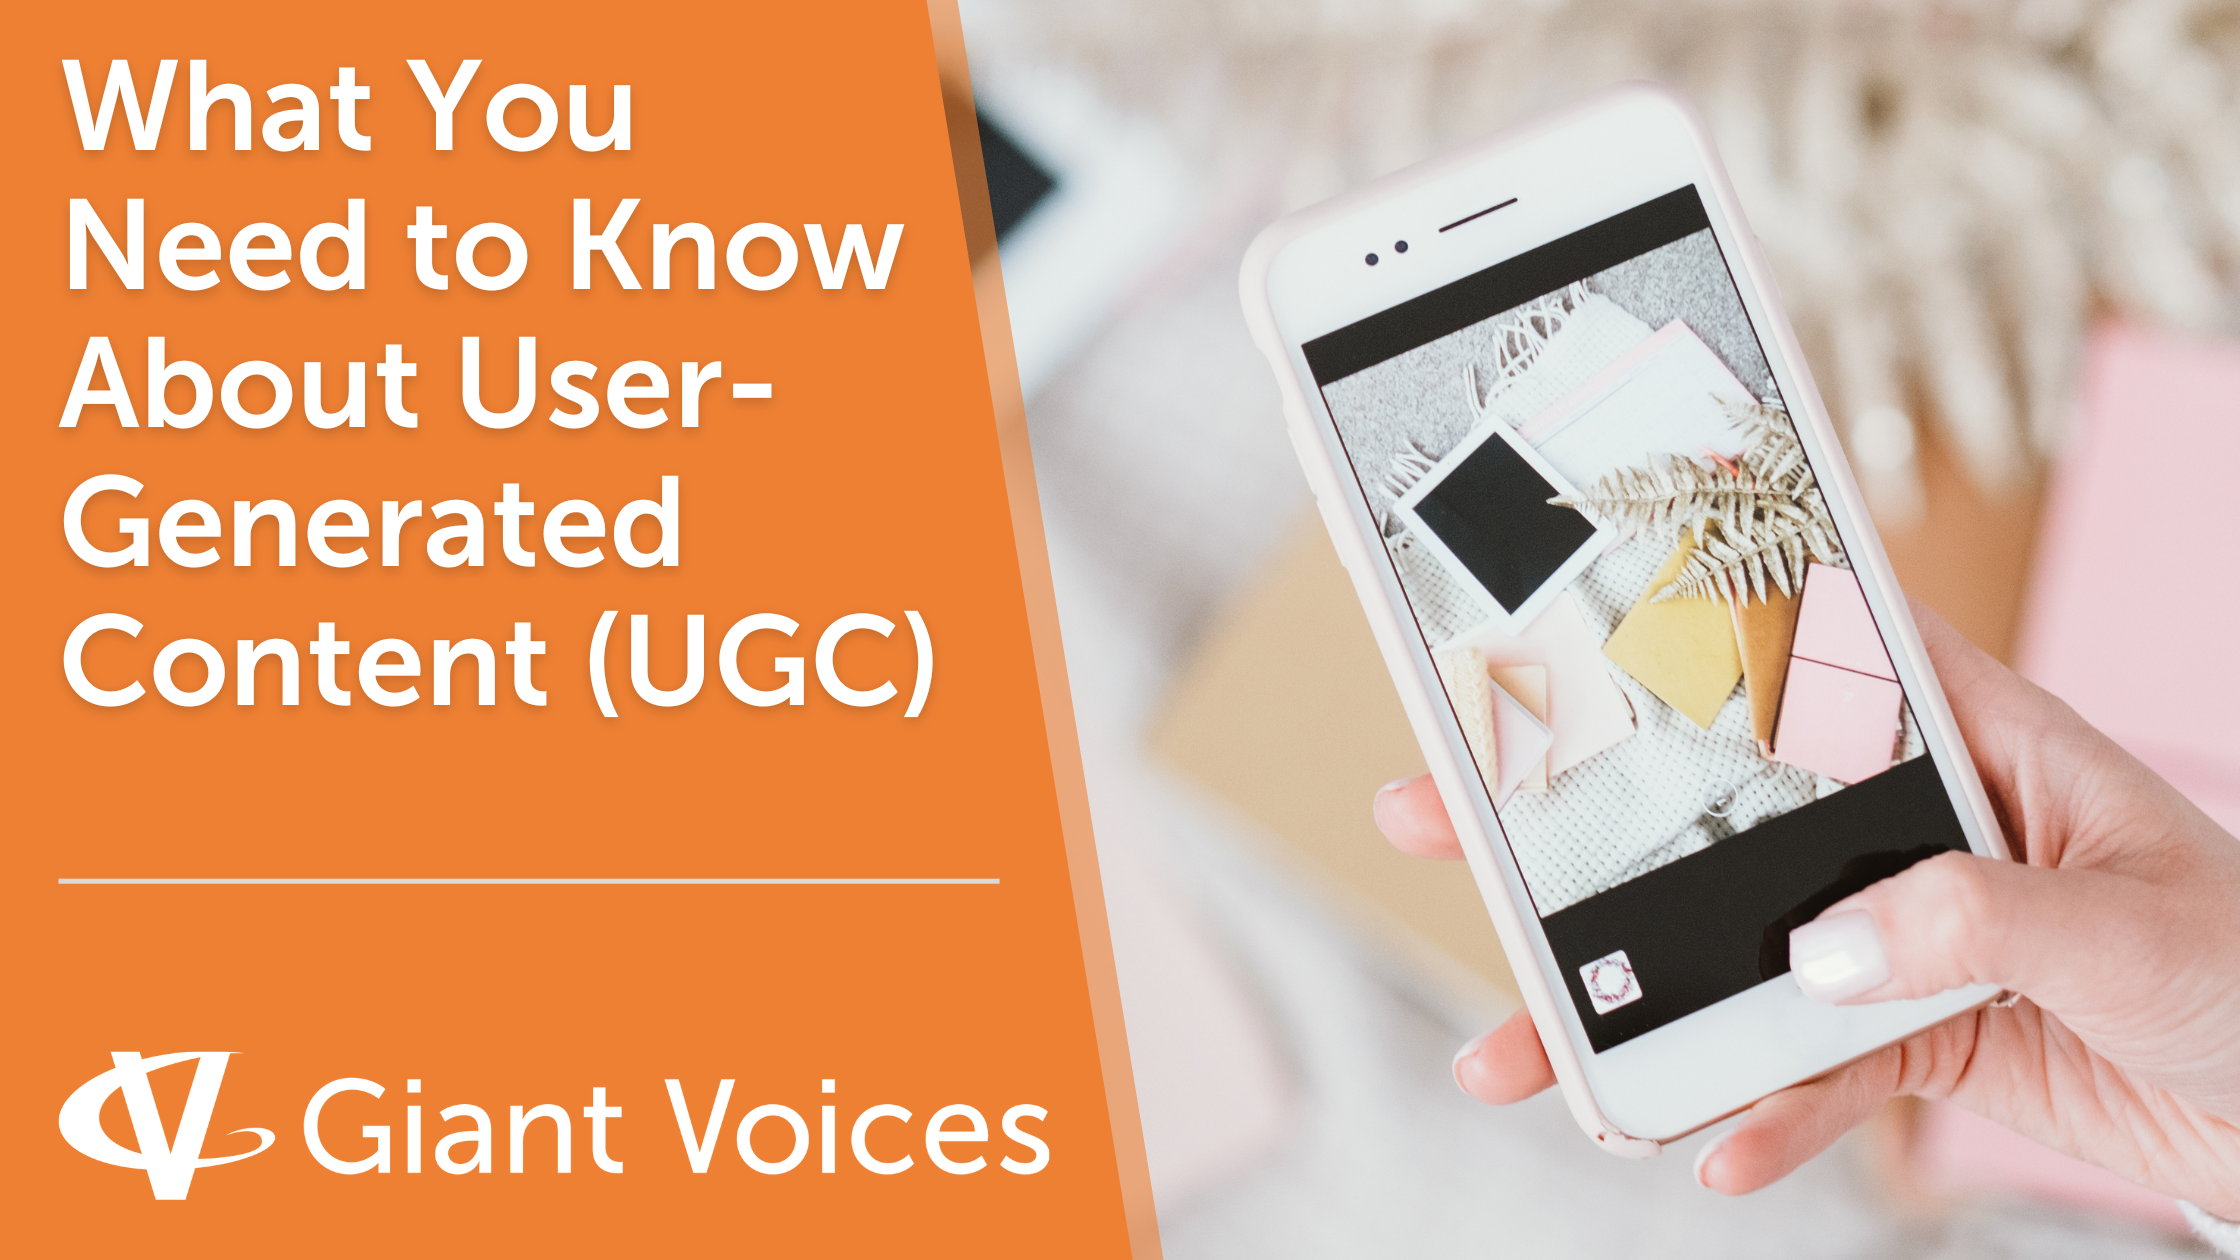 What You Need to Know About User-Generated Content (UGC)